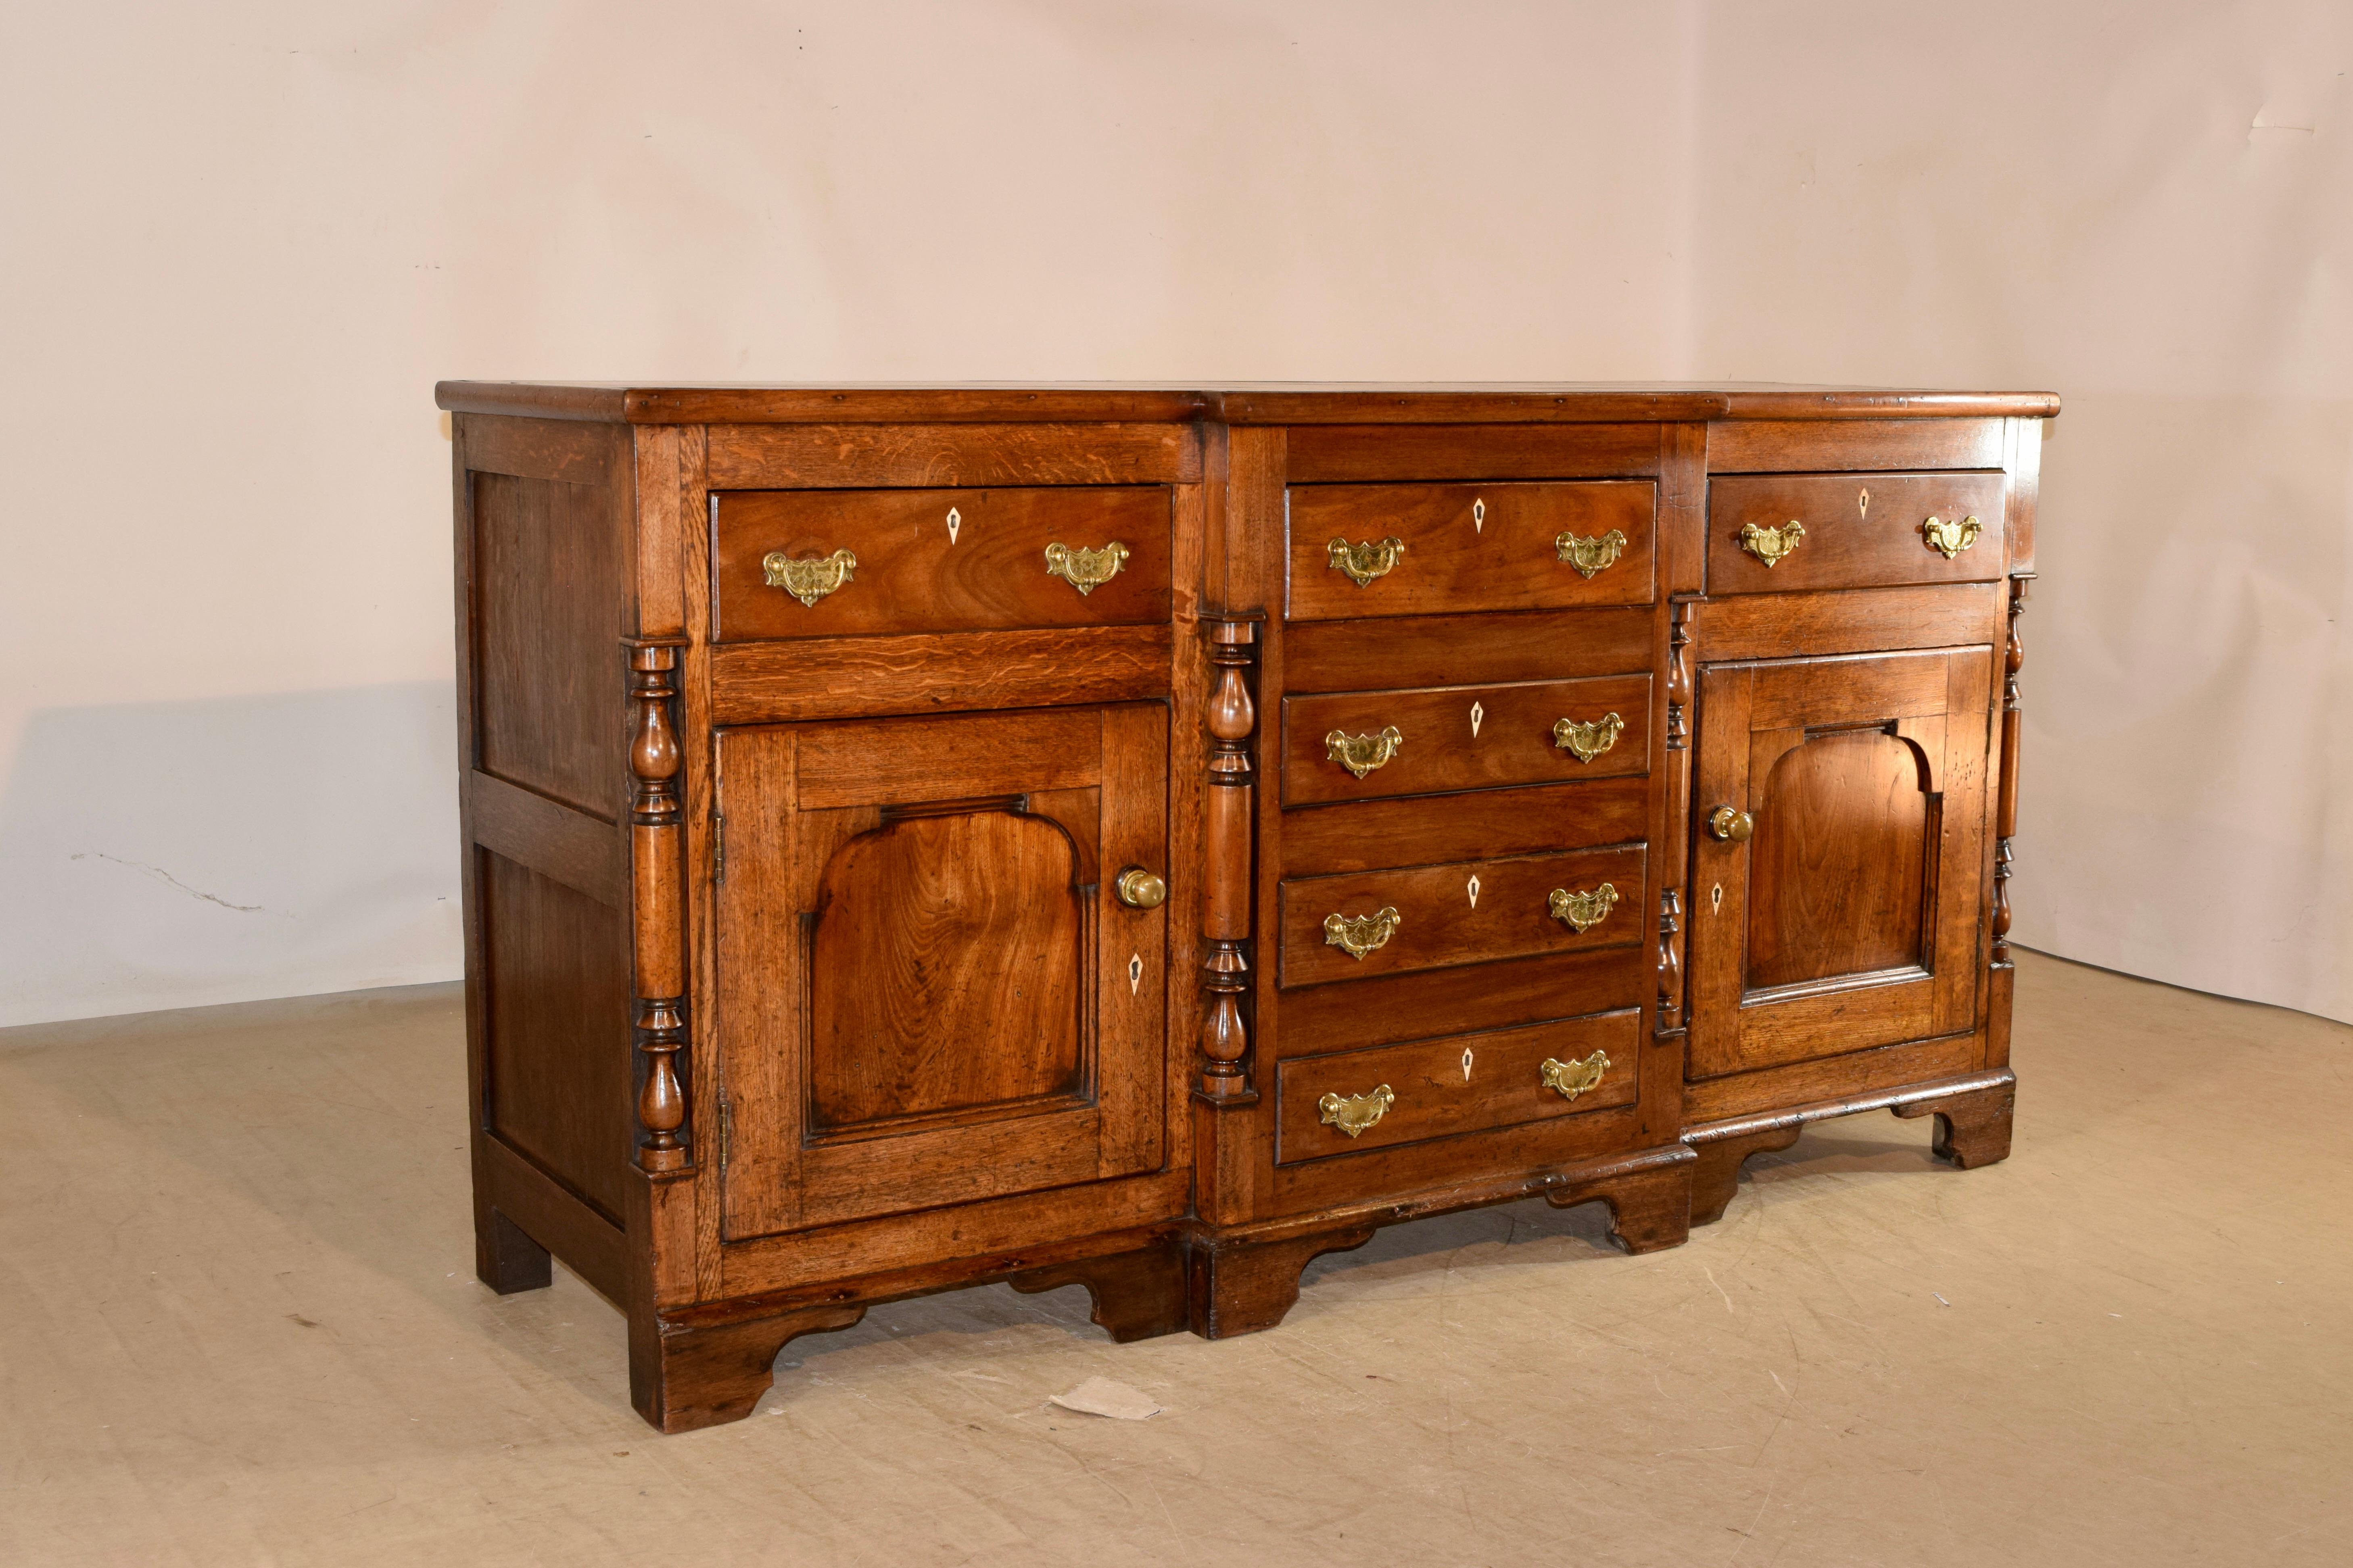 18th Century oak and elm dresser base from England. The top is made from three planks with a blocked front, following down to paneled sides and a block front case. The central section of which contains four drawers flanked with two hand turned